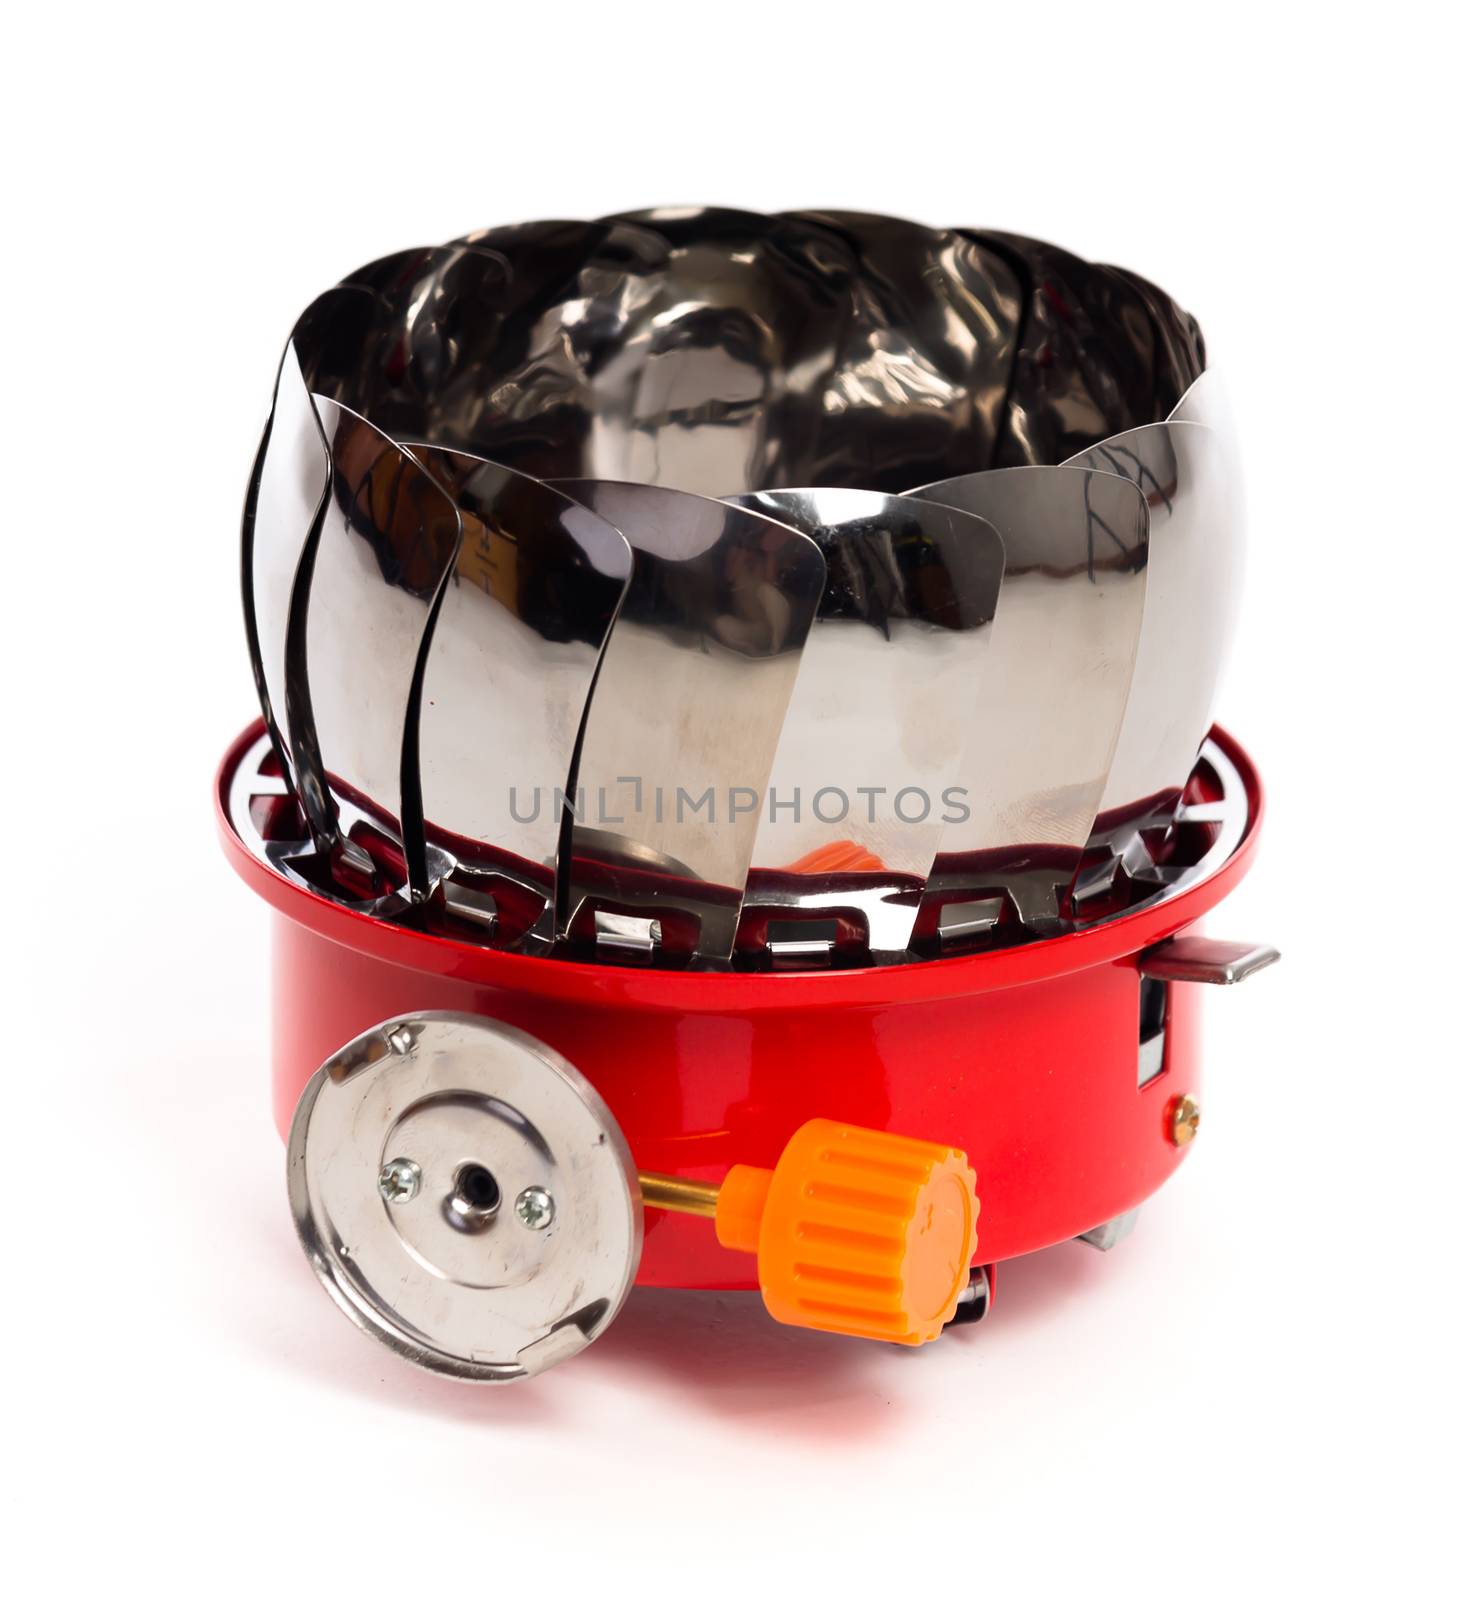 gas burner on a white background. Inventory travel